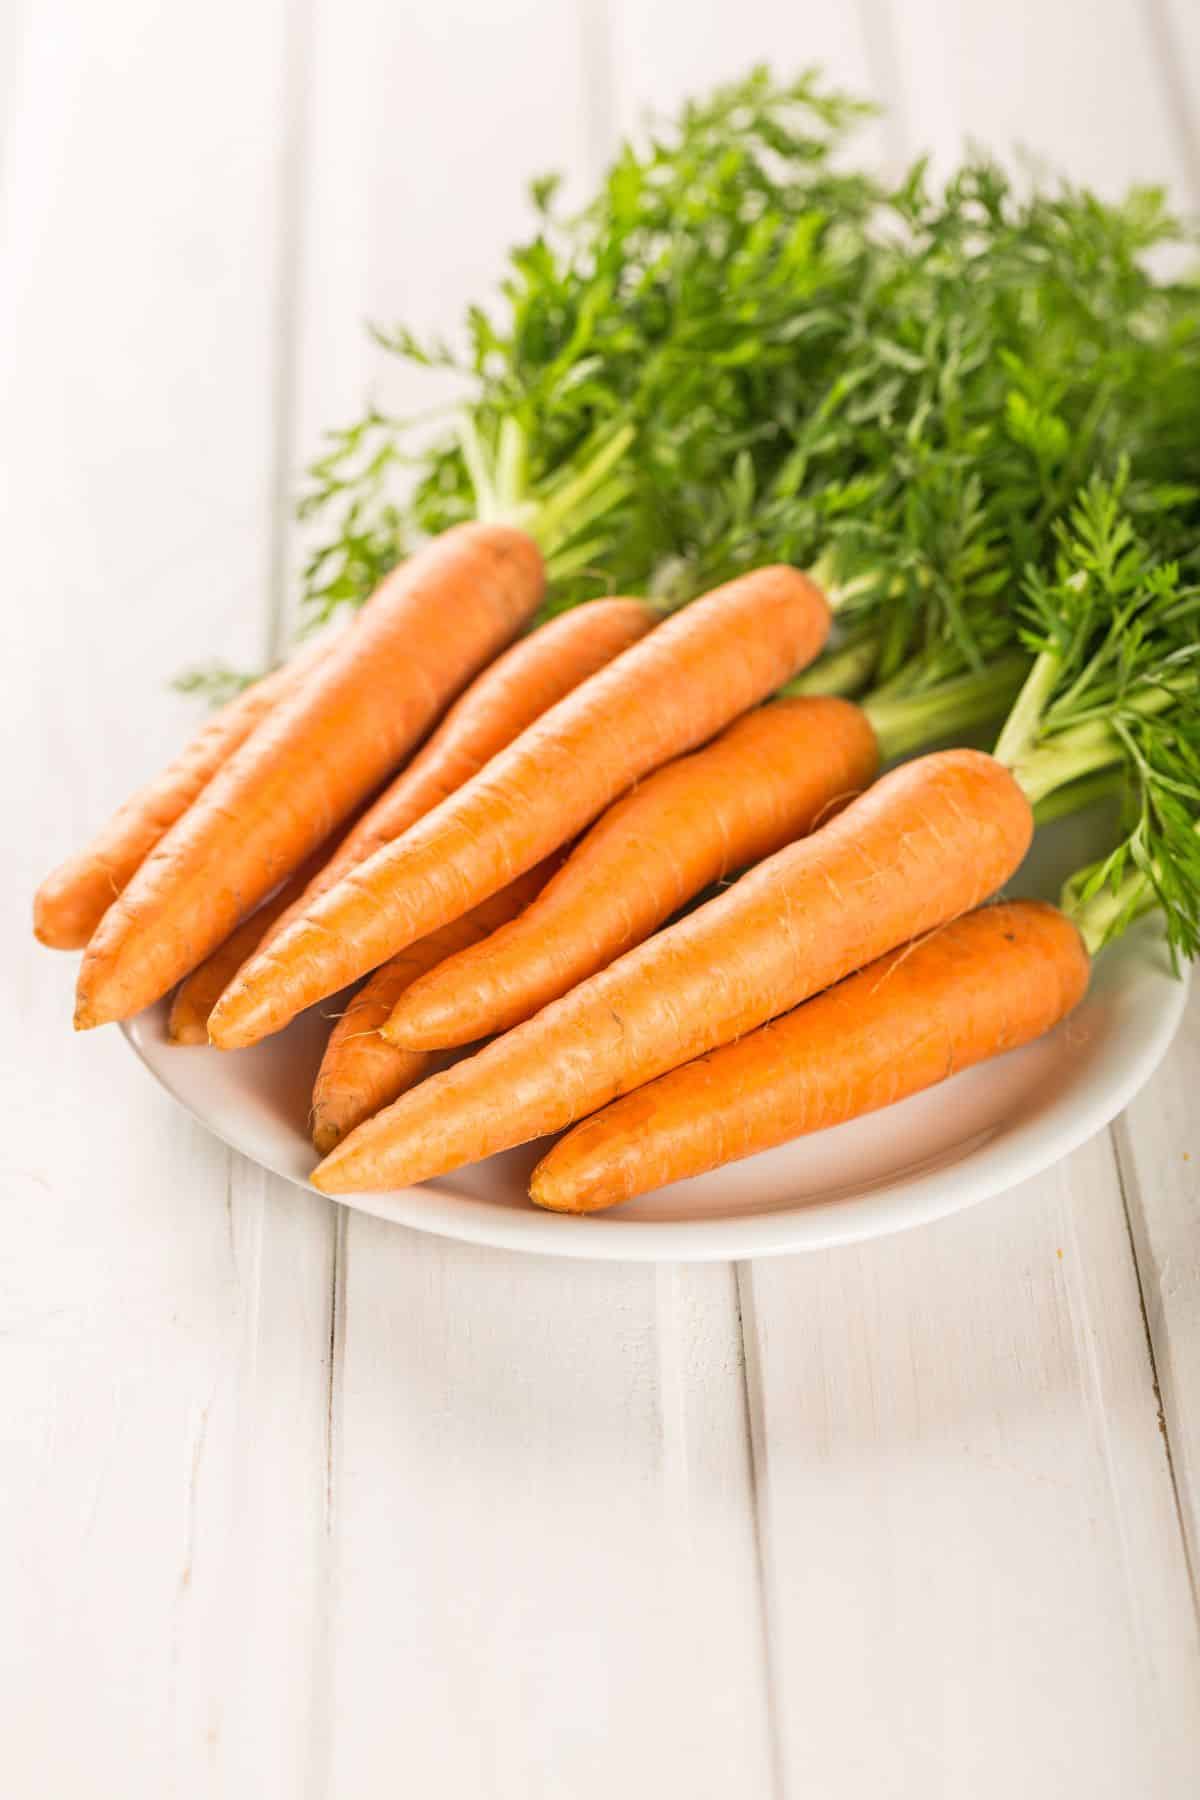 a bunch of carrots on a white plate.